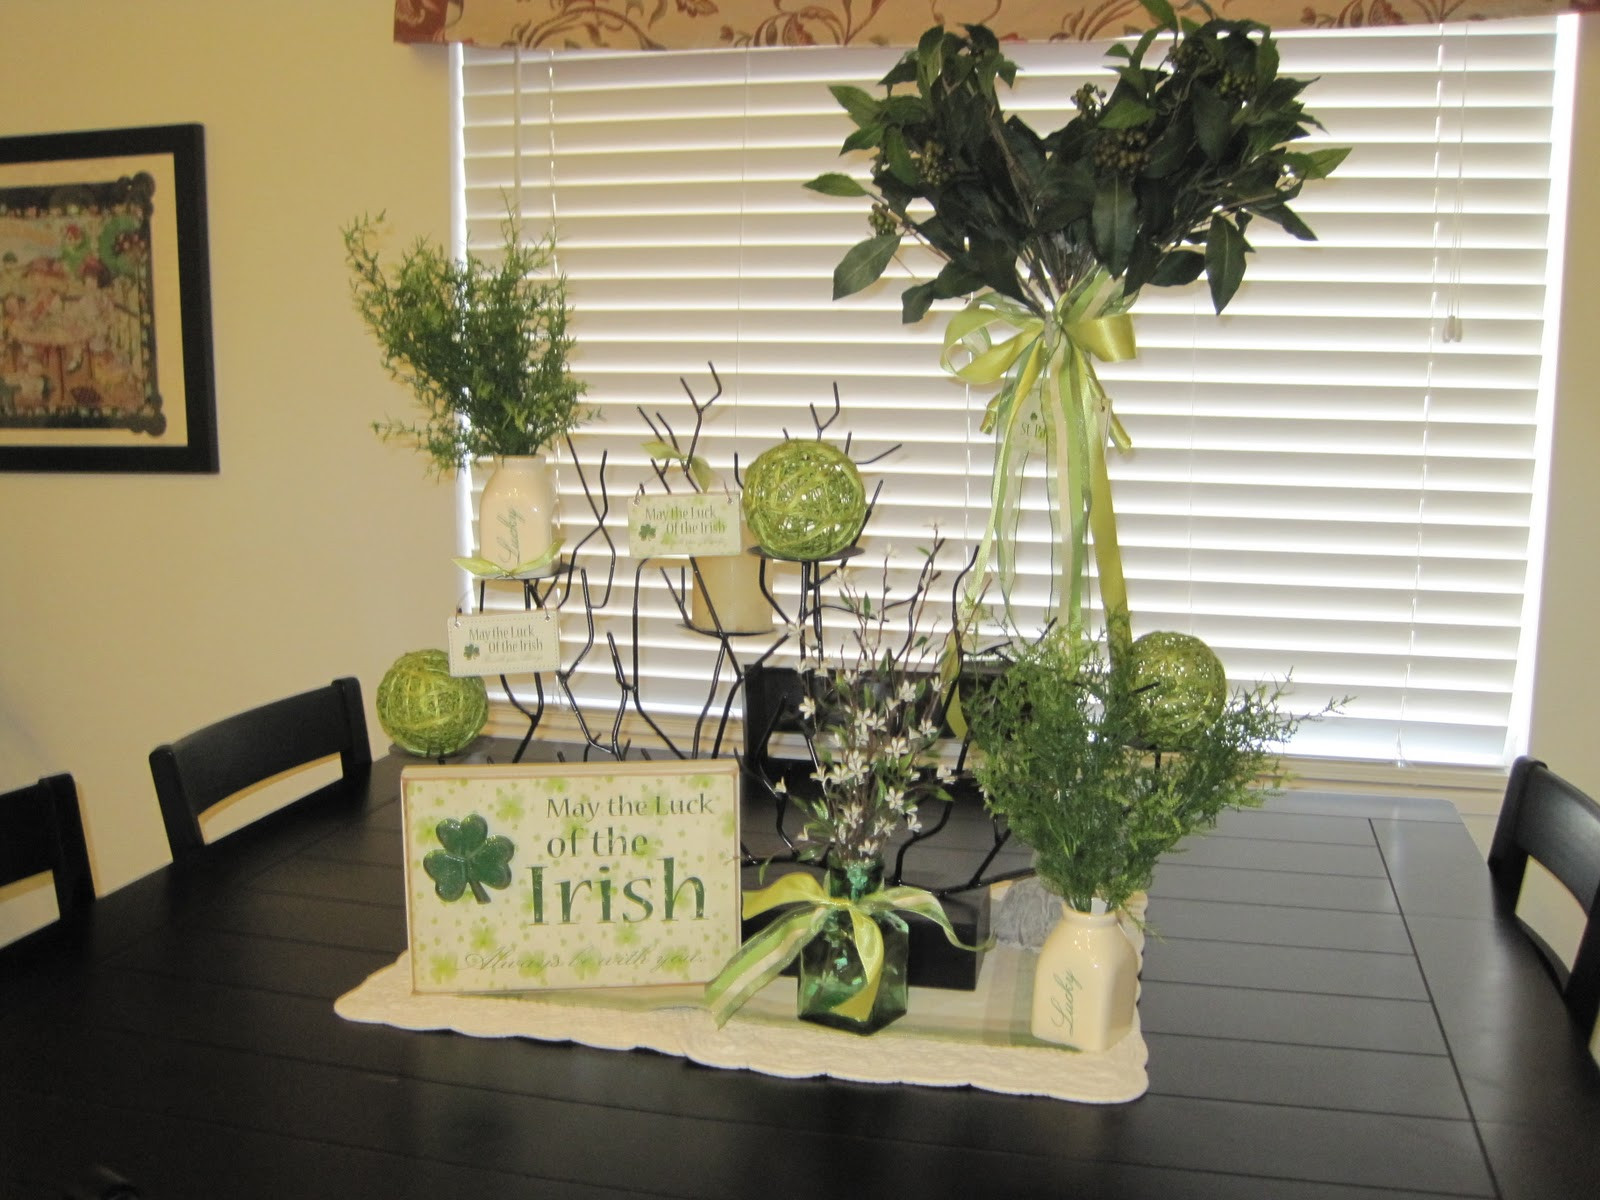 St Patrick's Day Door Decoration Ideas
 Do it Yourself Duo St Patrick s Day Decor